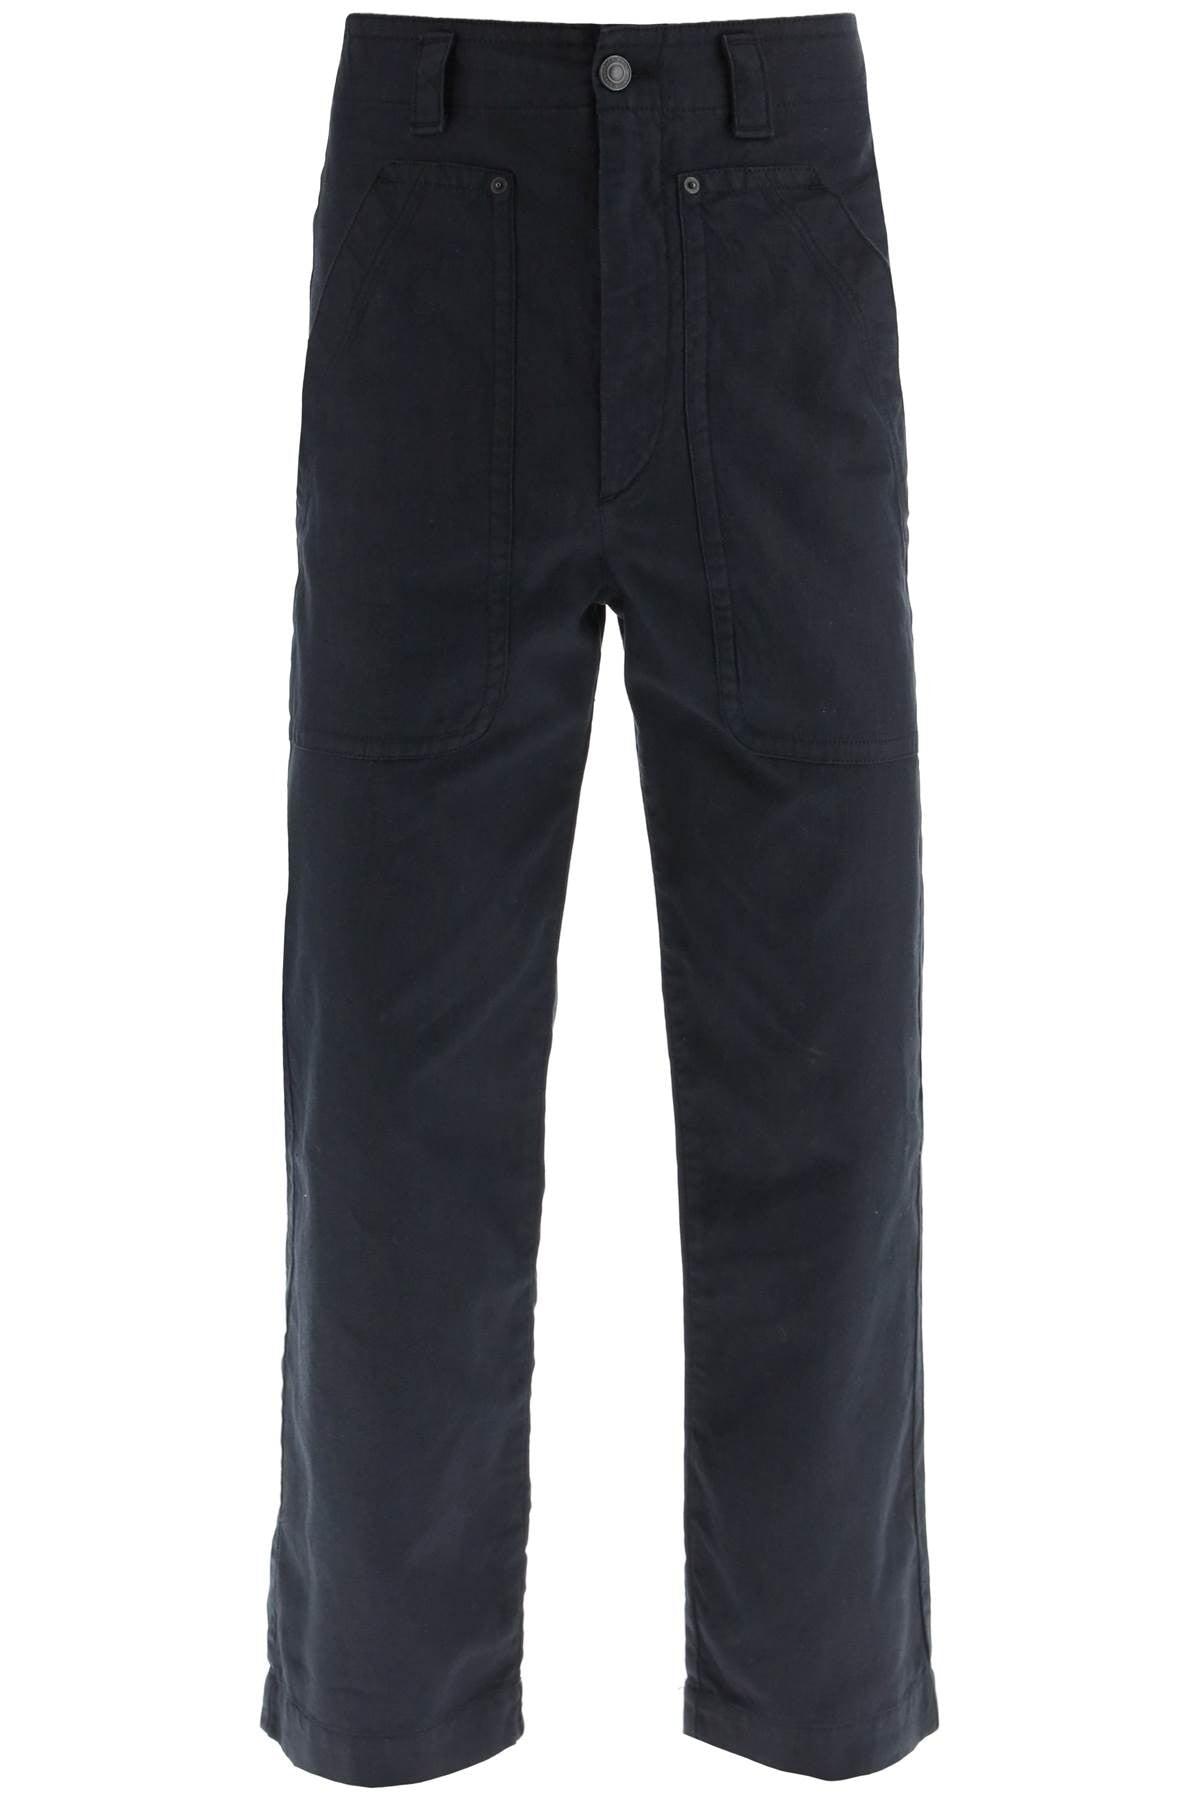 Isabel Marant 'perel' Cotton And Linen Pants in Blue for Men | Lyst